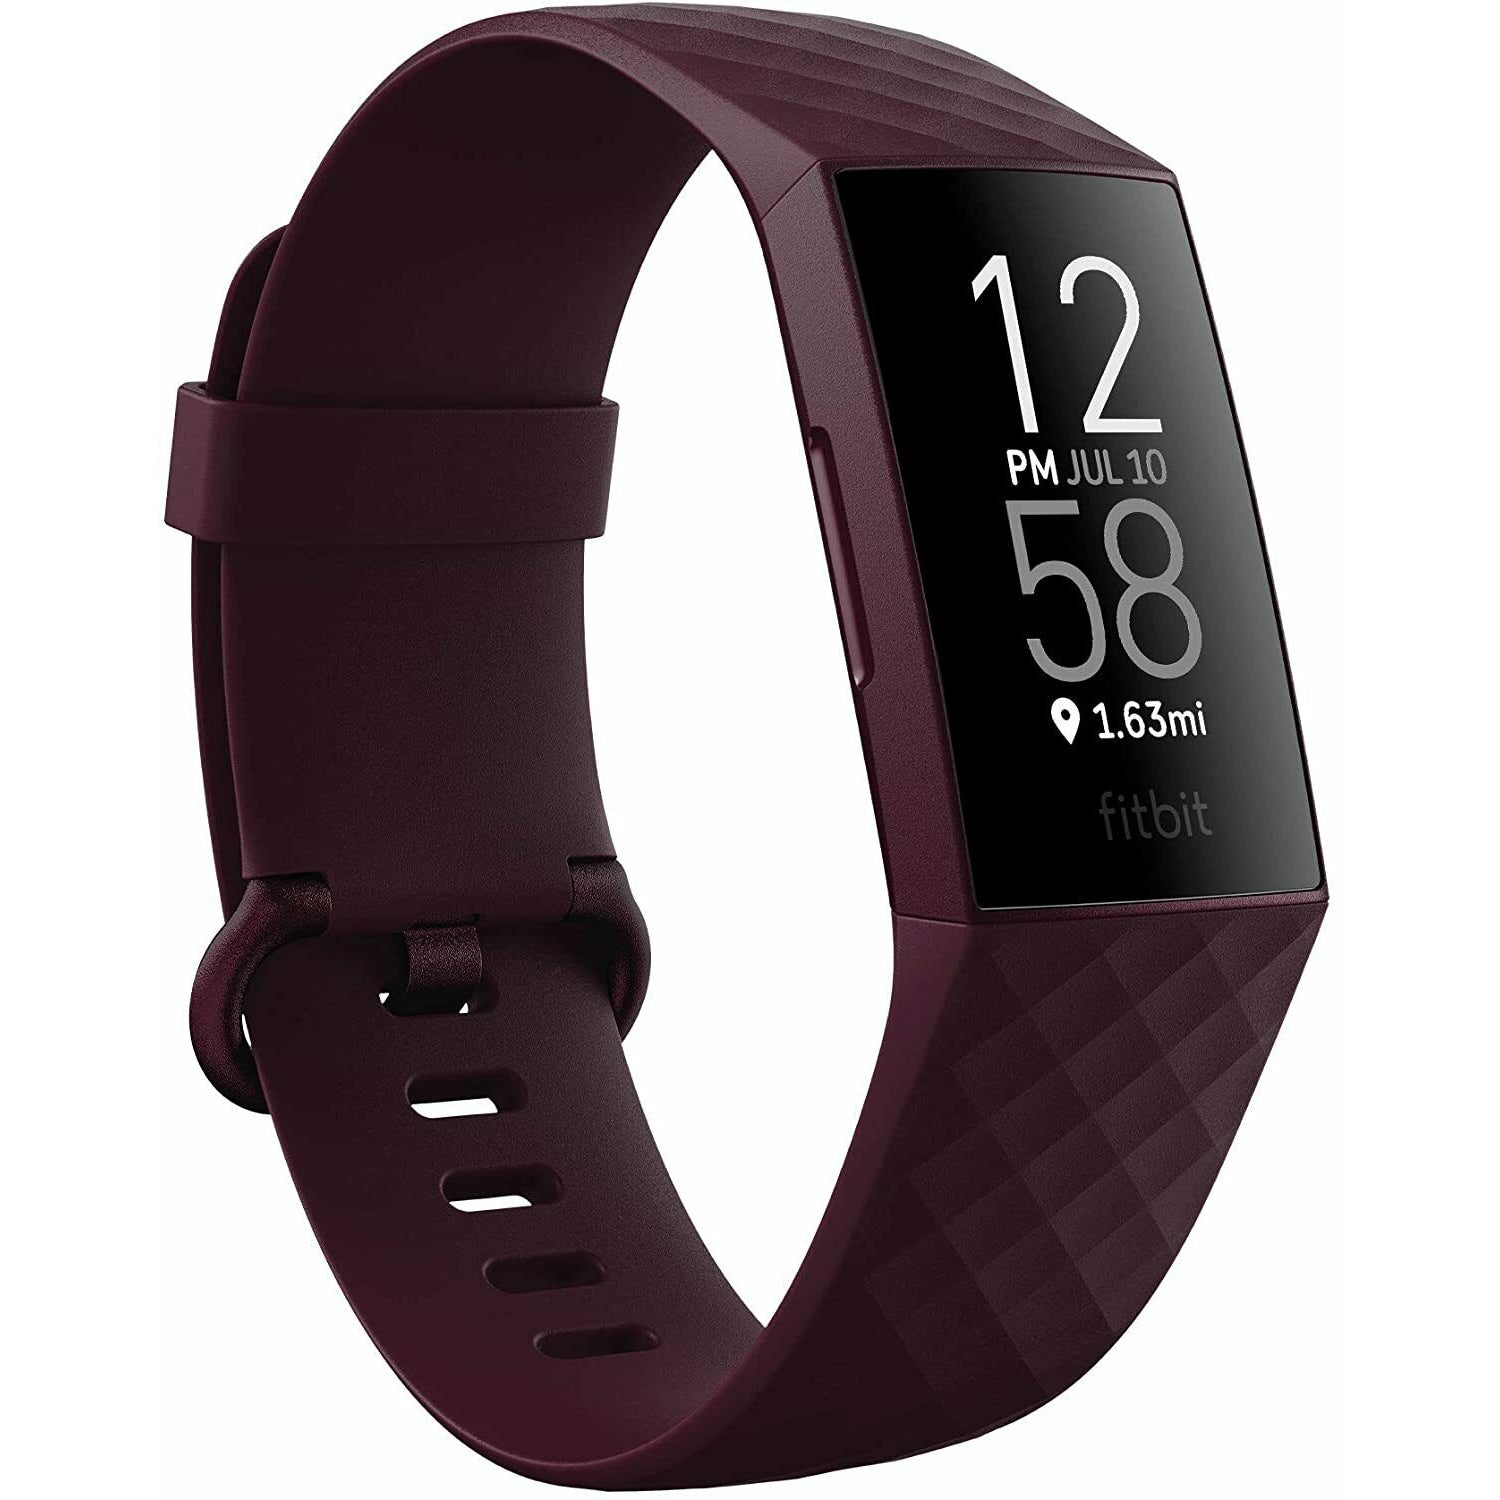 Fitbit Charge 4 Advanced Fitness Tracker with GPS - Rosewood - Refurbished Pristine